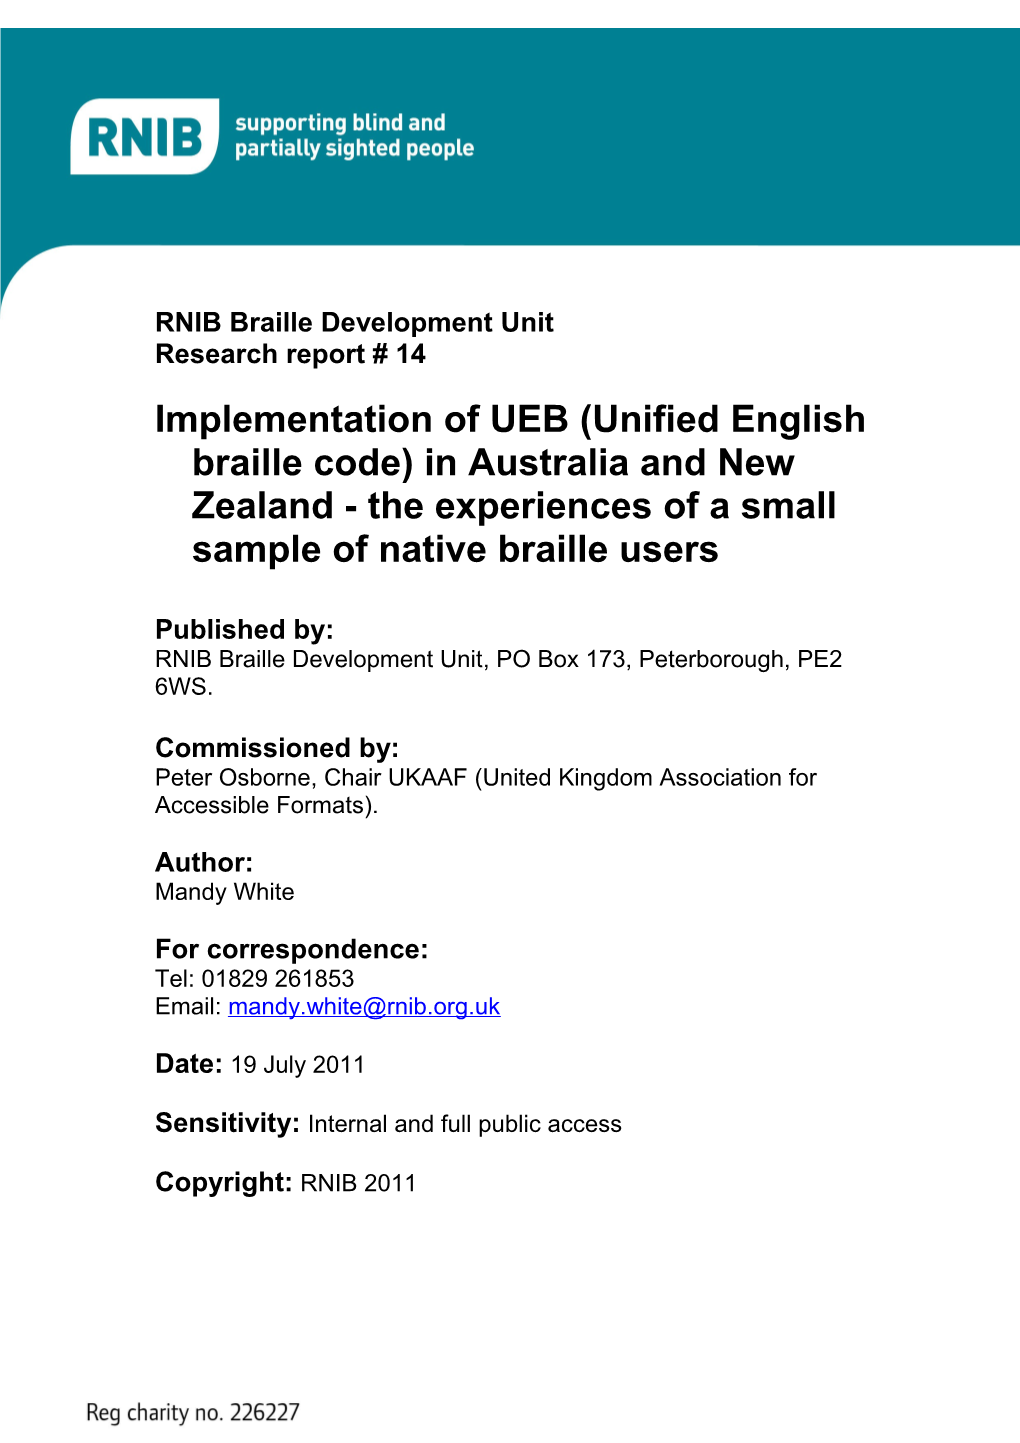 Implementation of UEB (Unified English Braille Code) in Australia and New Zealand - The